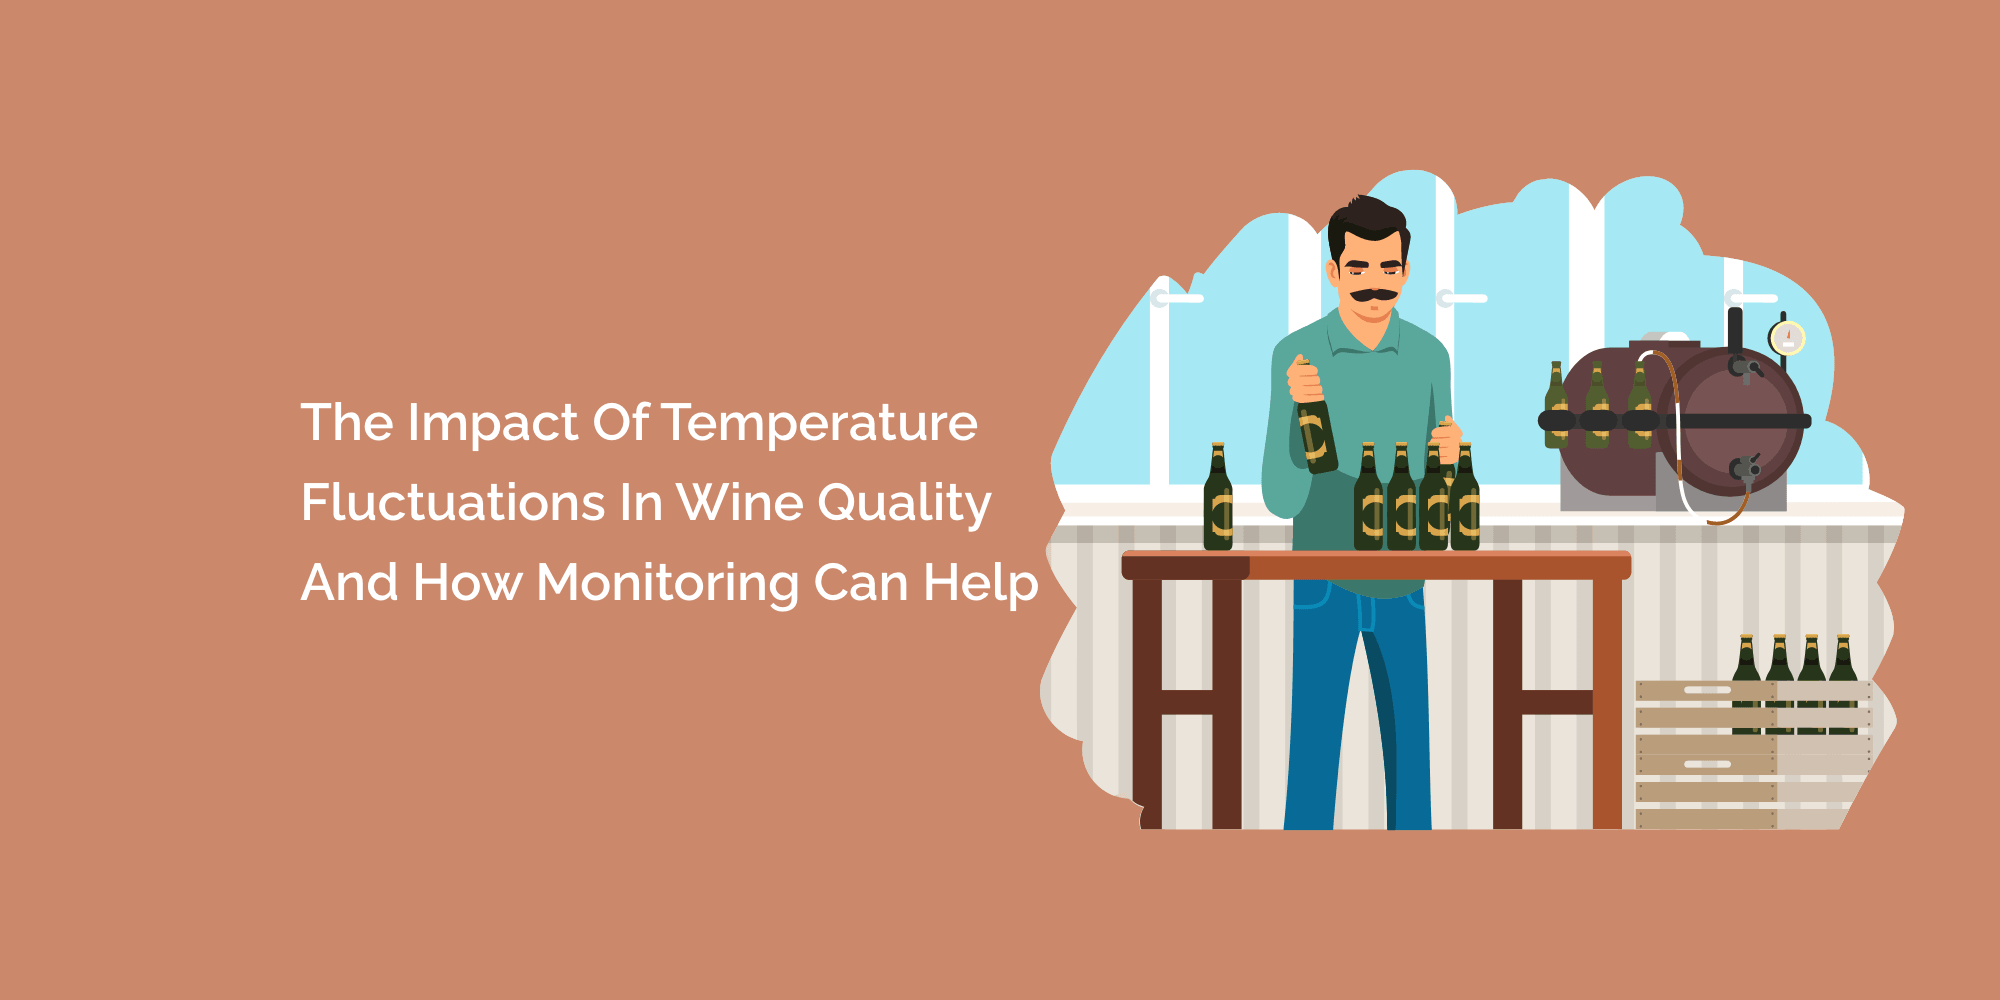 The Impact of Temperature Fluctuations on Wine Quality and How Monitoring Can Help